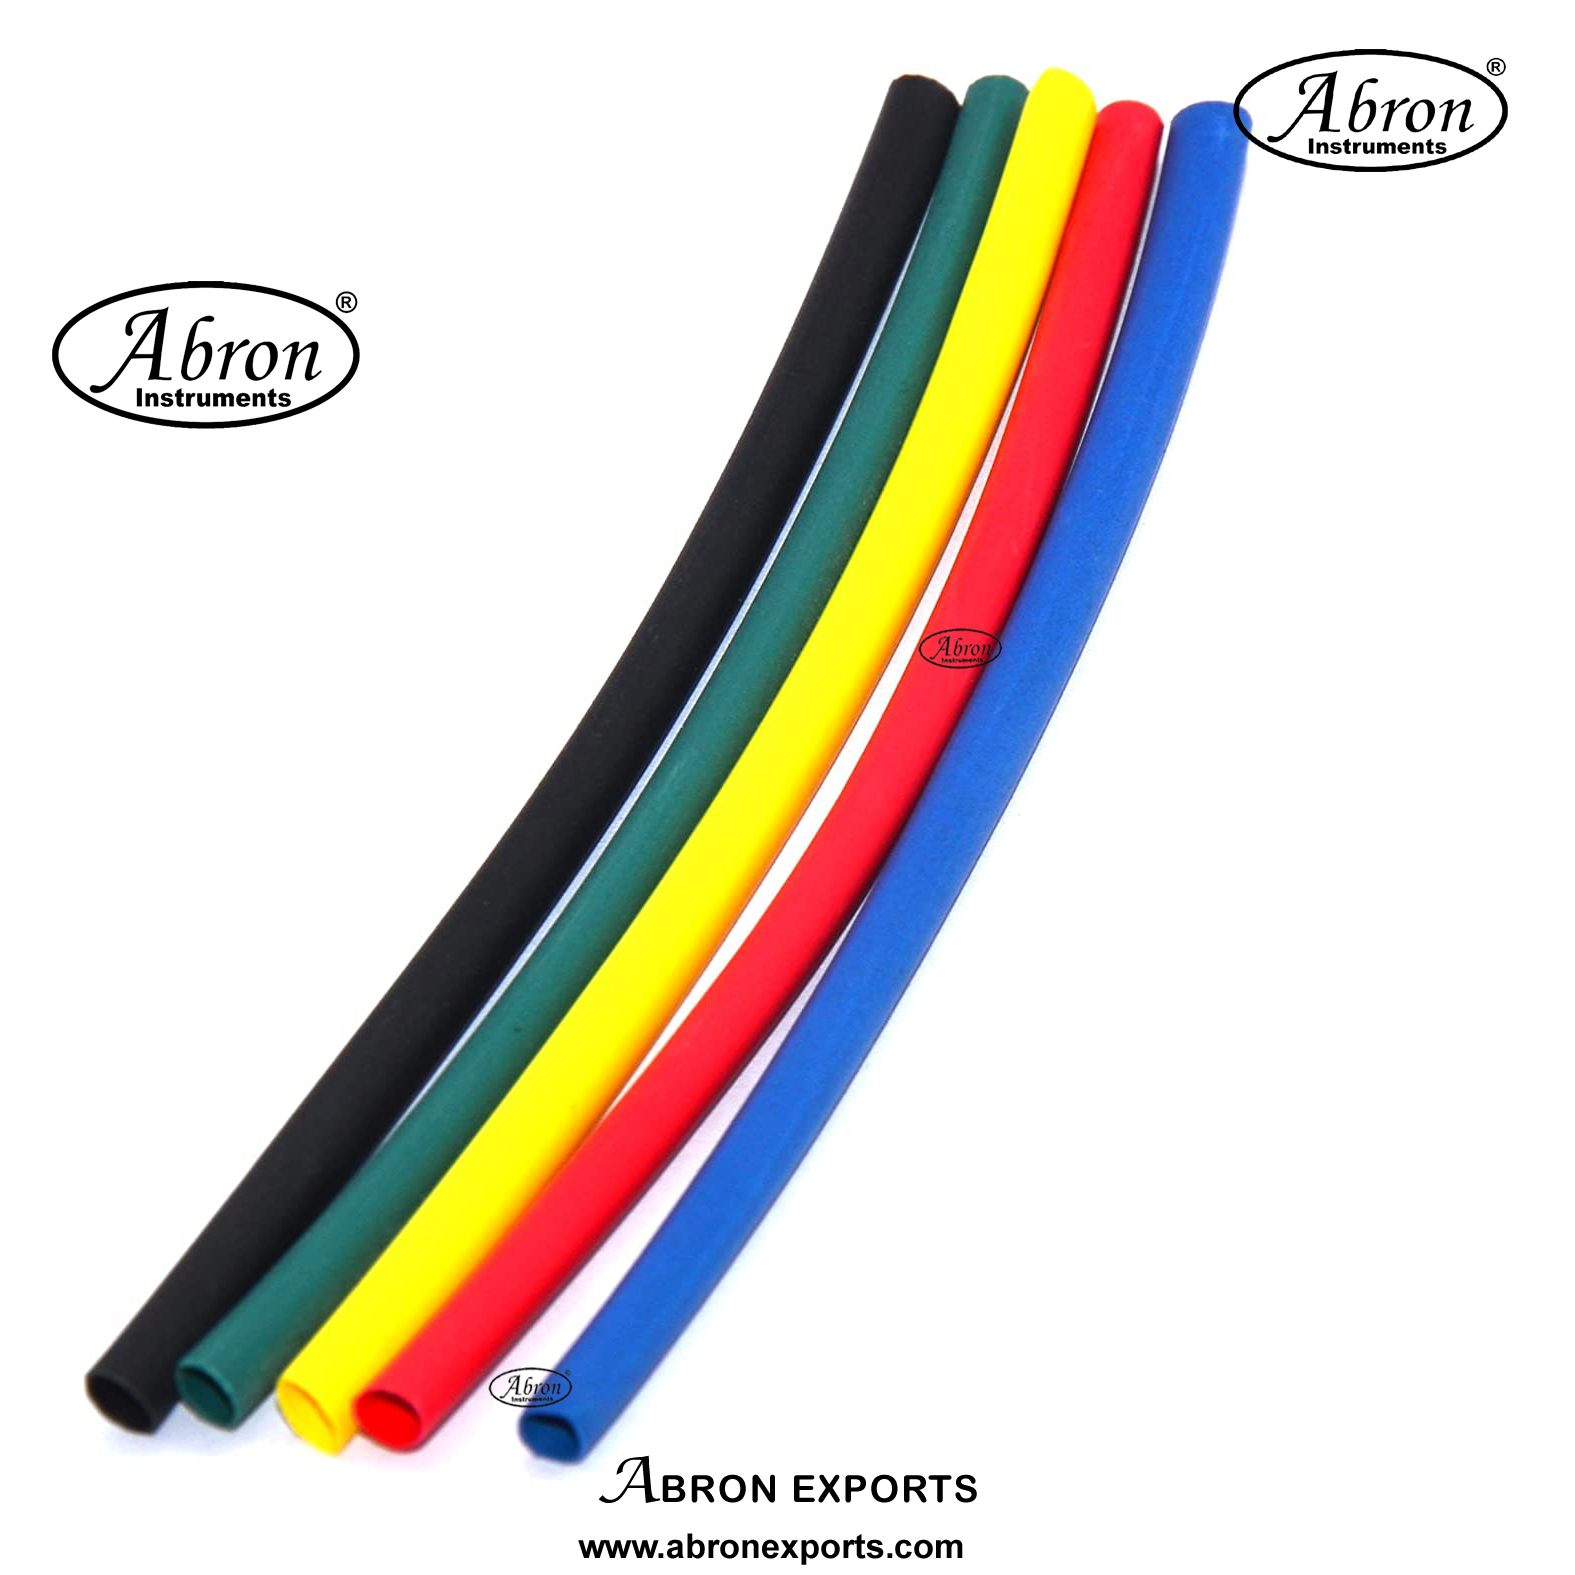 Wire shrik sleeve wraping wire joint 3mmx2m Polyolefin Heat Shrink Tubinh any one Black Red Green Yellow Blue Abron AE-1224WS